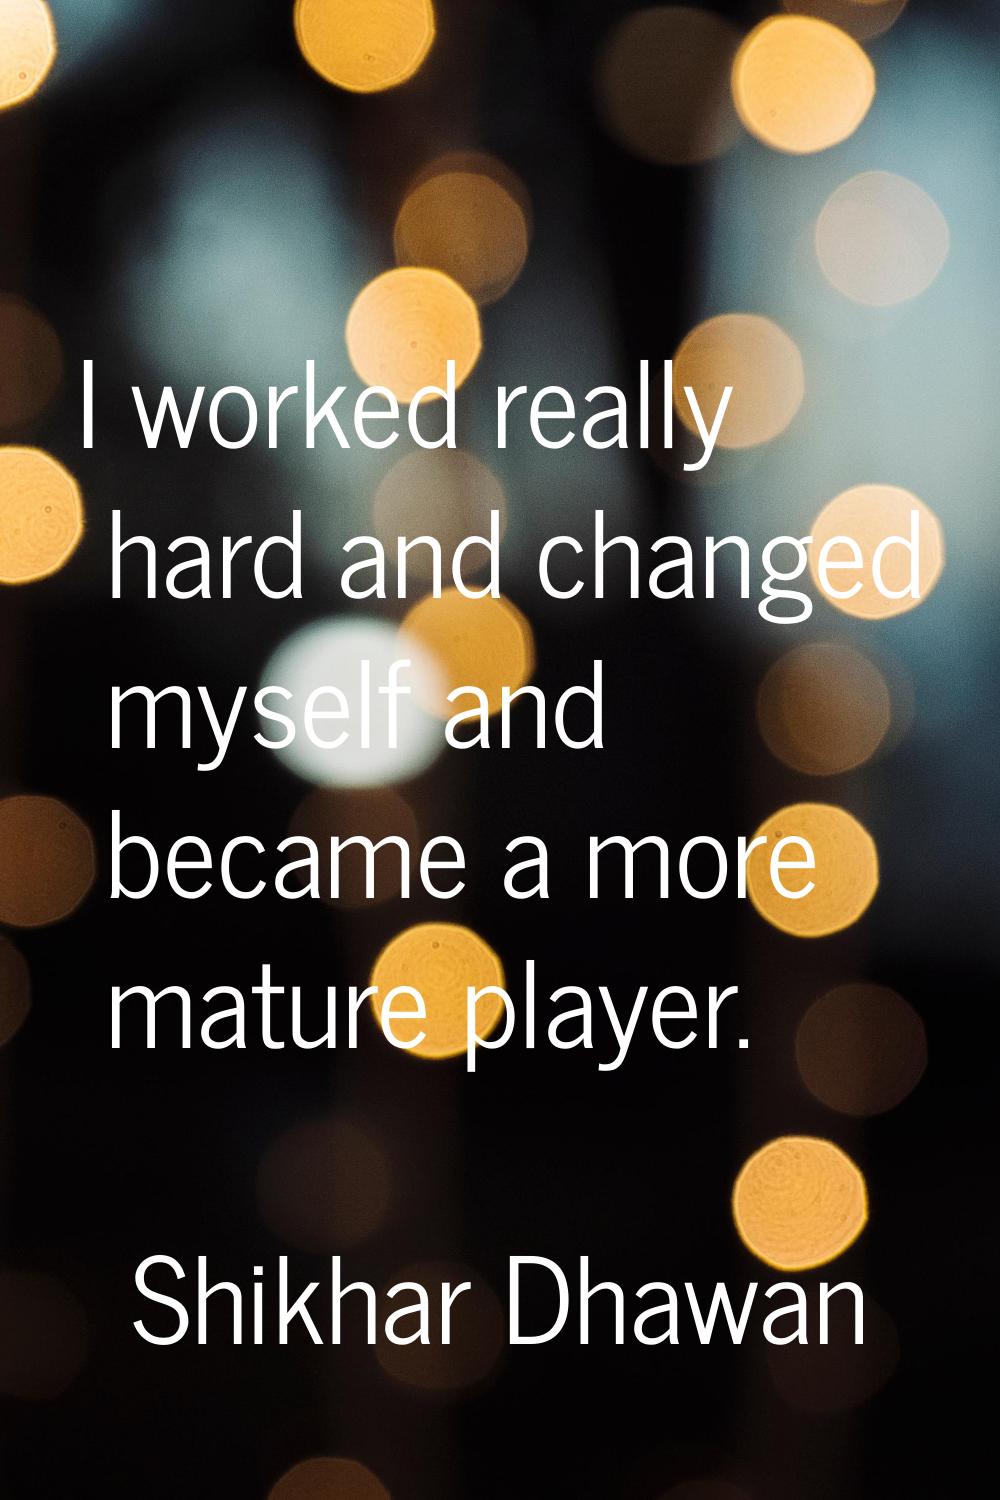 I worked really hard and changed myself and became a more mature player.